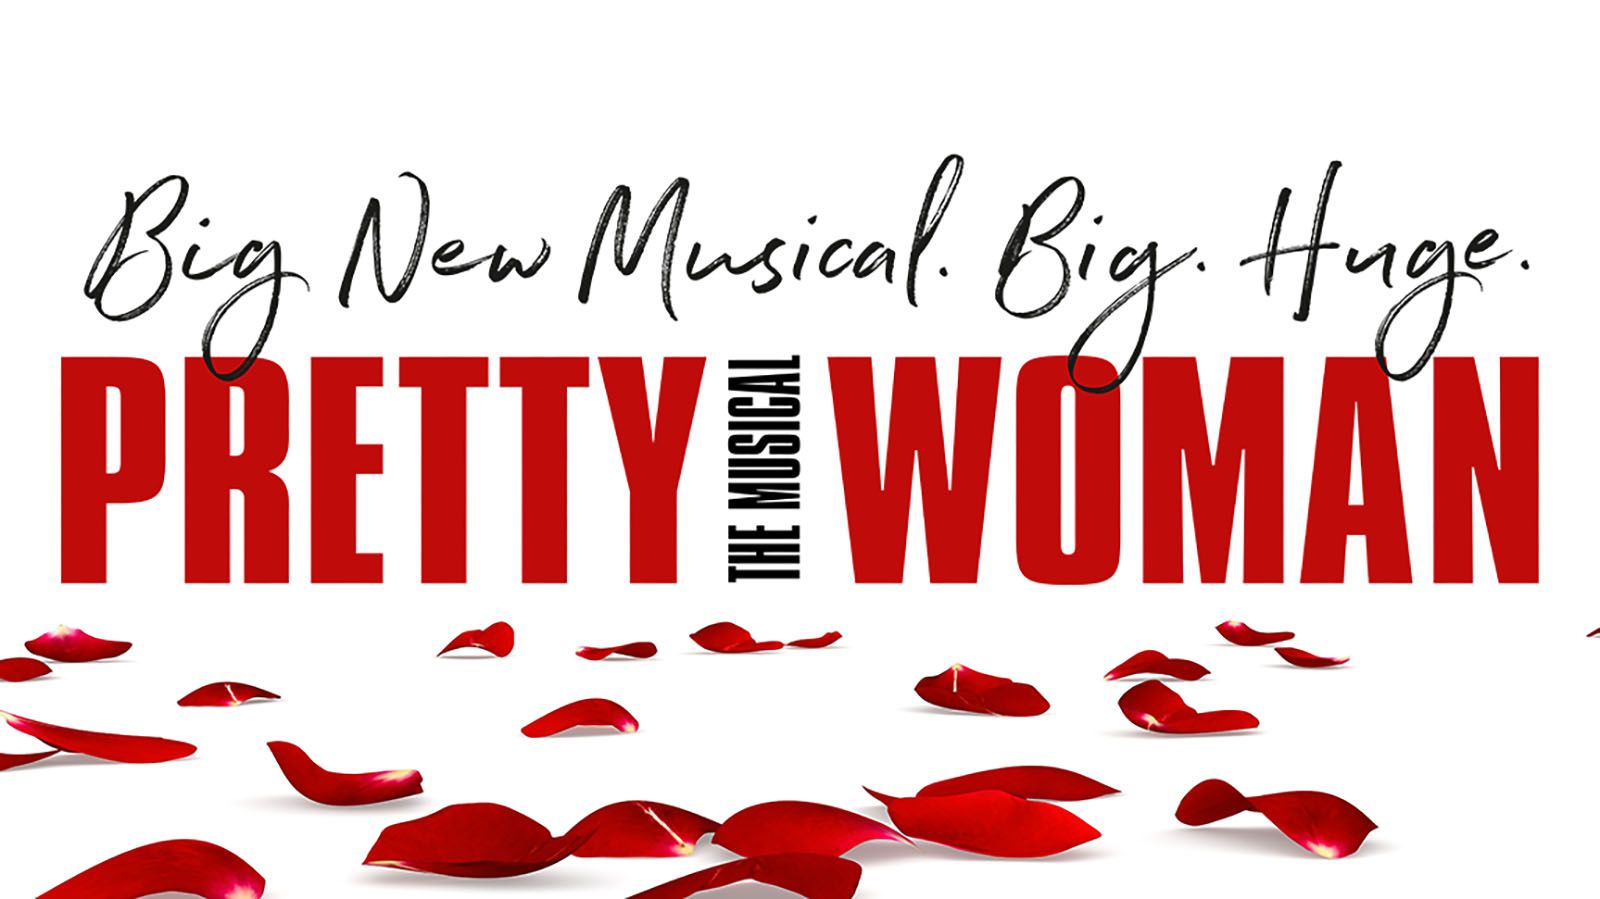 Pretty Woman: The Musical will be at Embassy Theatre on April 13.